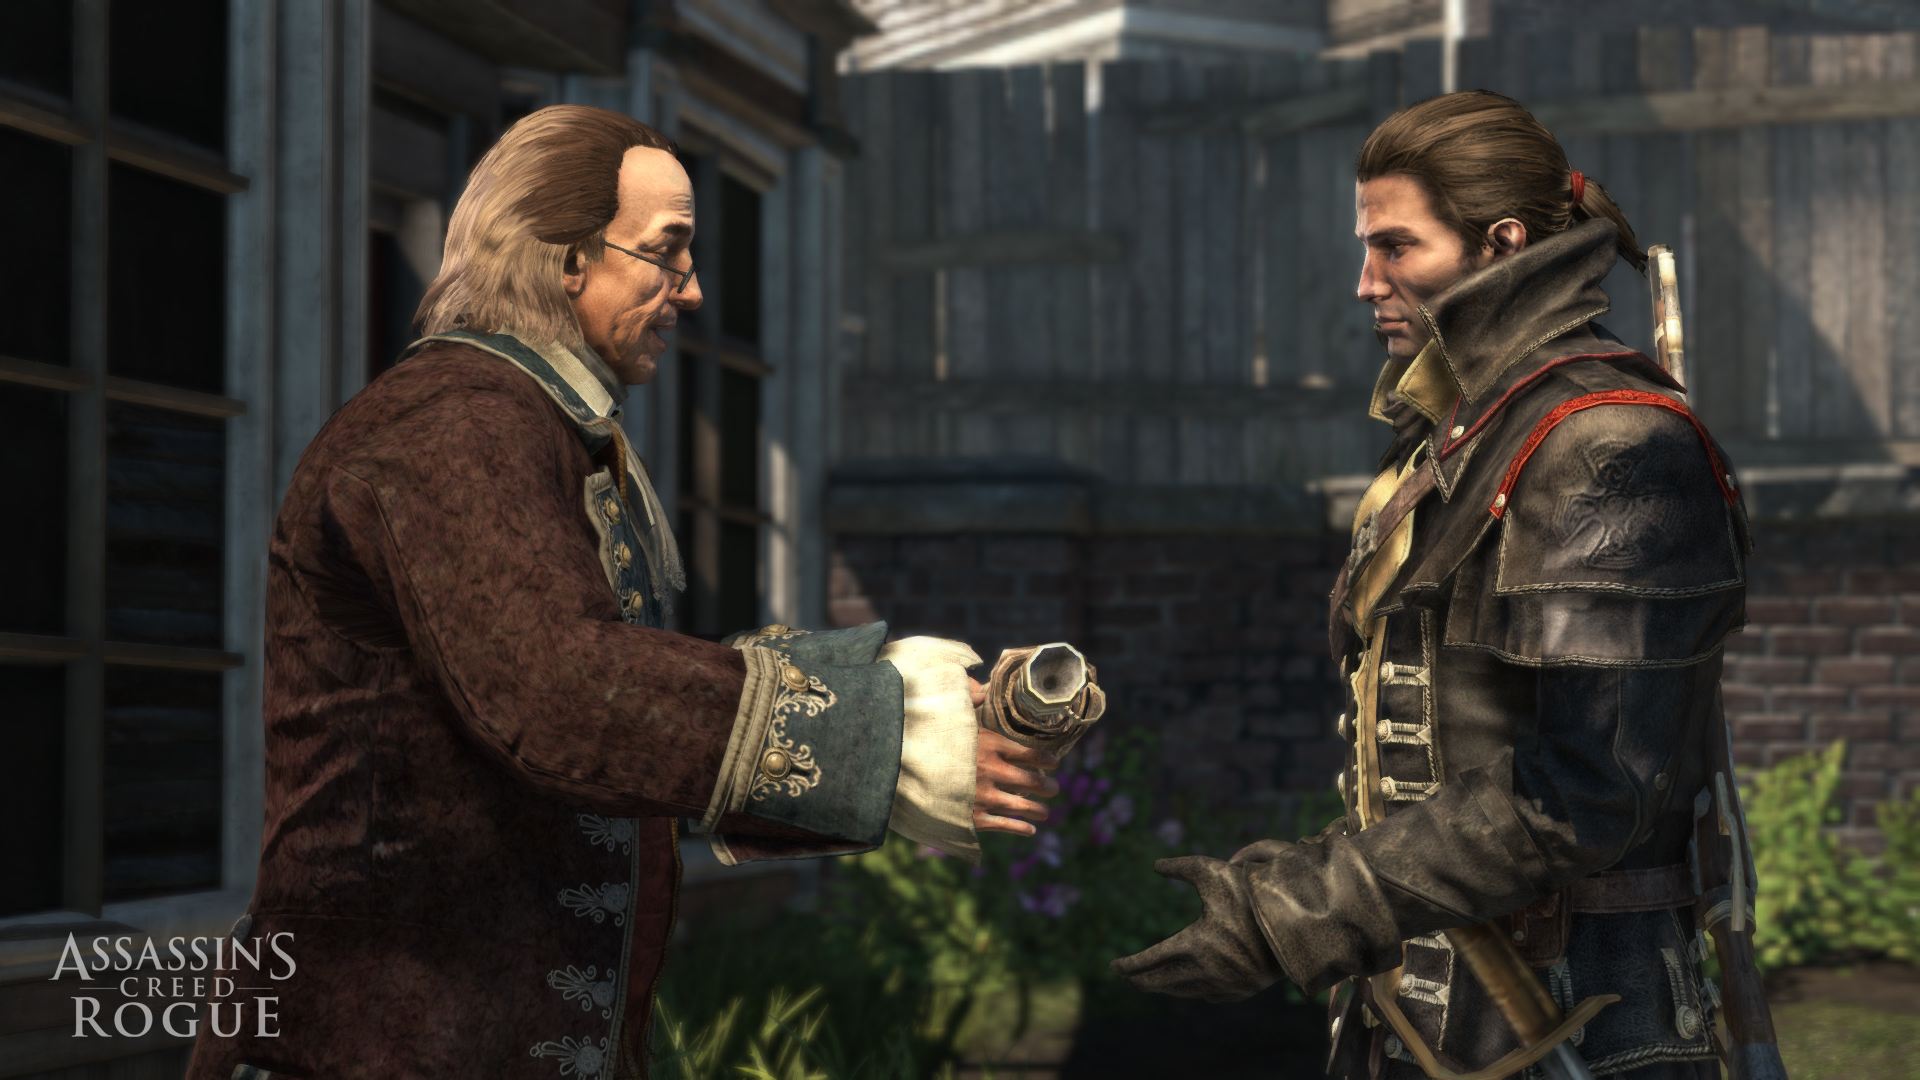 Assassin's Creed Rogue Gallery #7